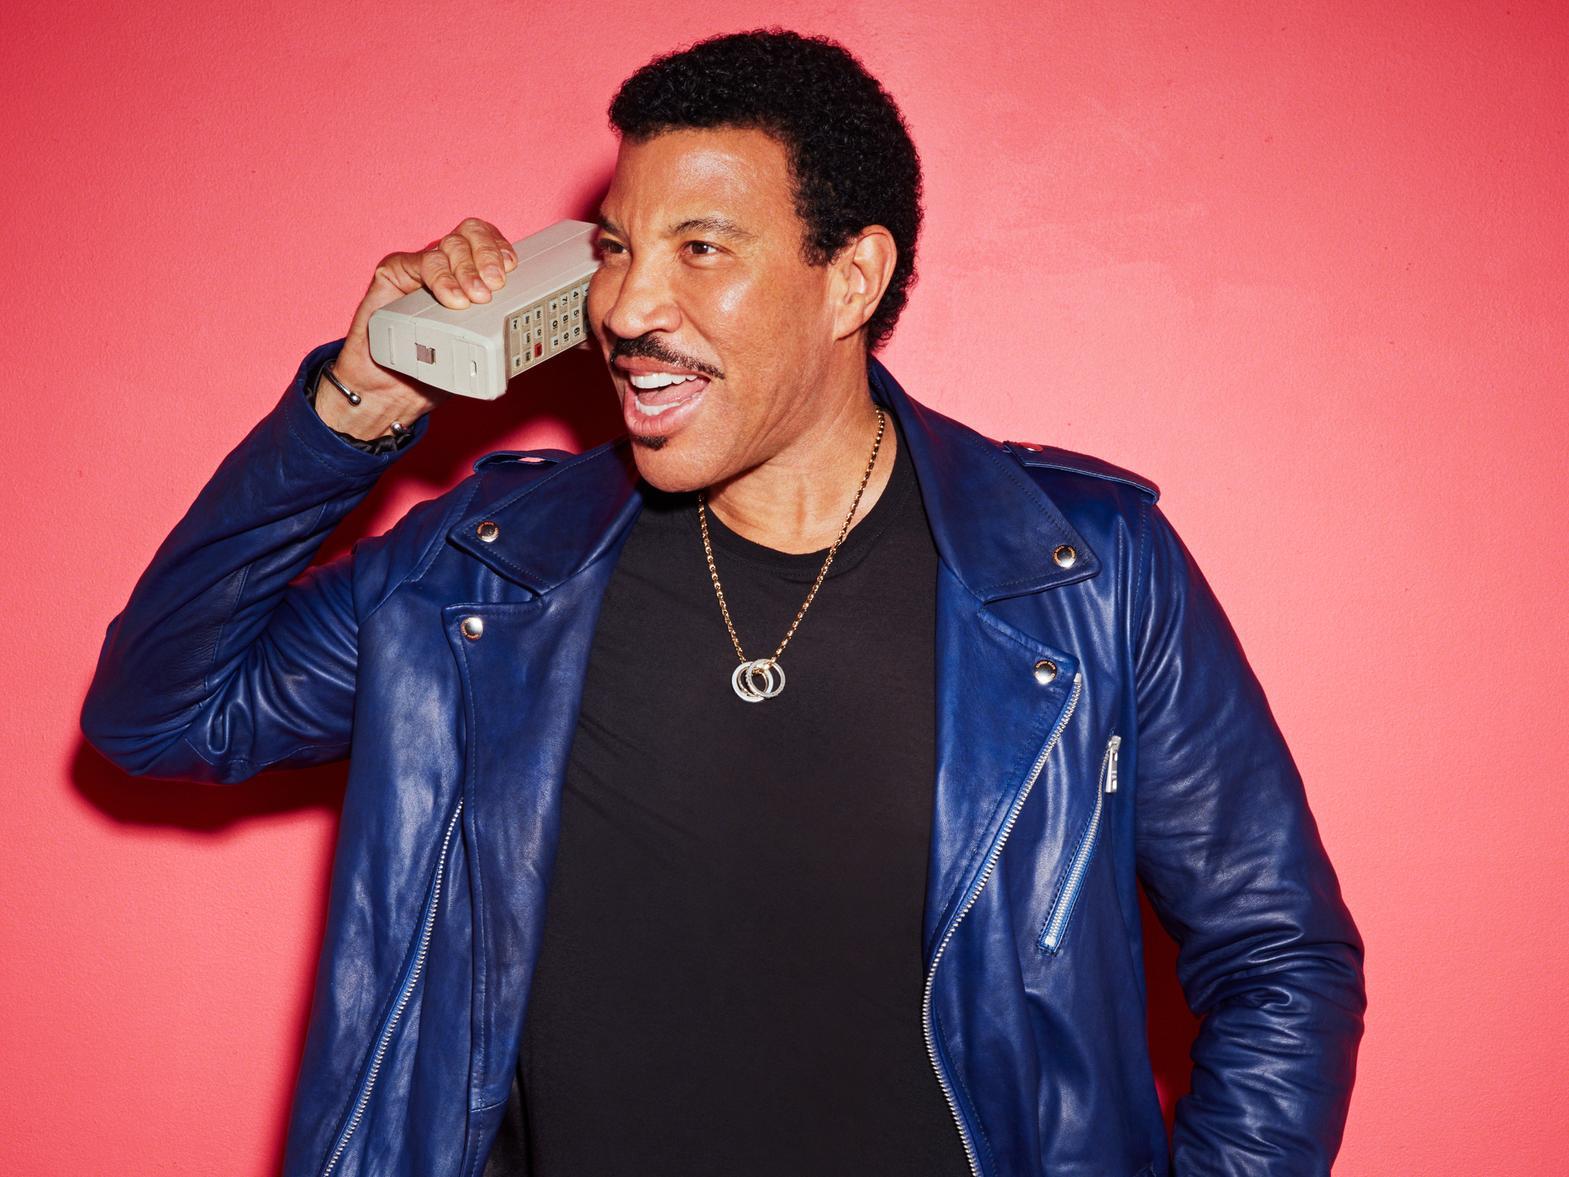 International superstarLionel Richie will performhits from his extensive and much-loved repertoire spanning five decades.His music is part of the fabric of pop music and Richie has sold more than 100 million albums worldwide.